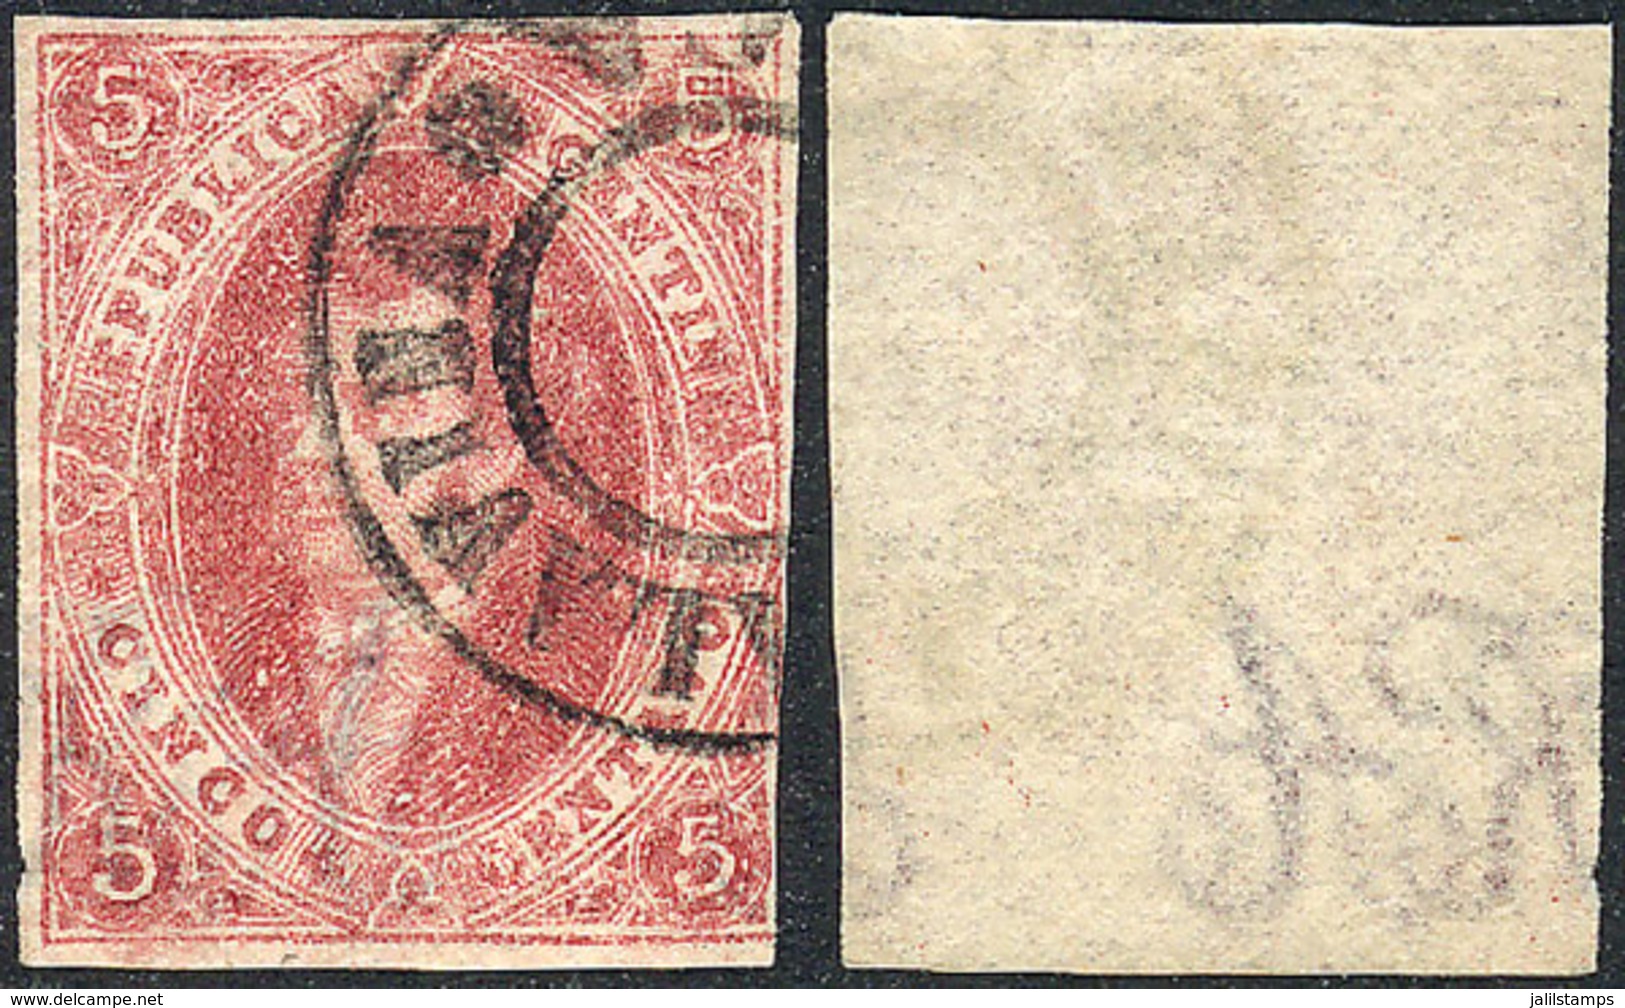 167 ARGENTINA: GJ.25, 4th Printing, With The Extremely Rare Double Circle Cancel Of SALA - Neufs